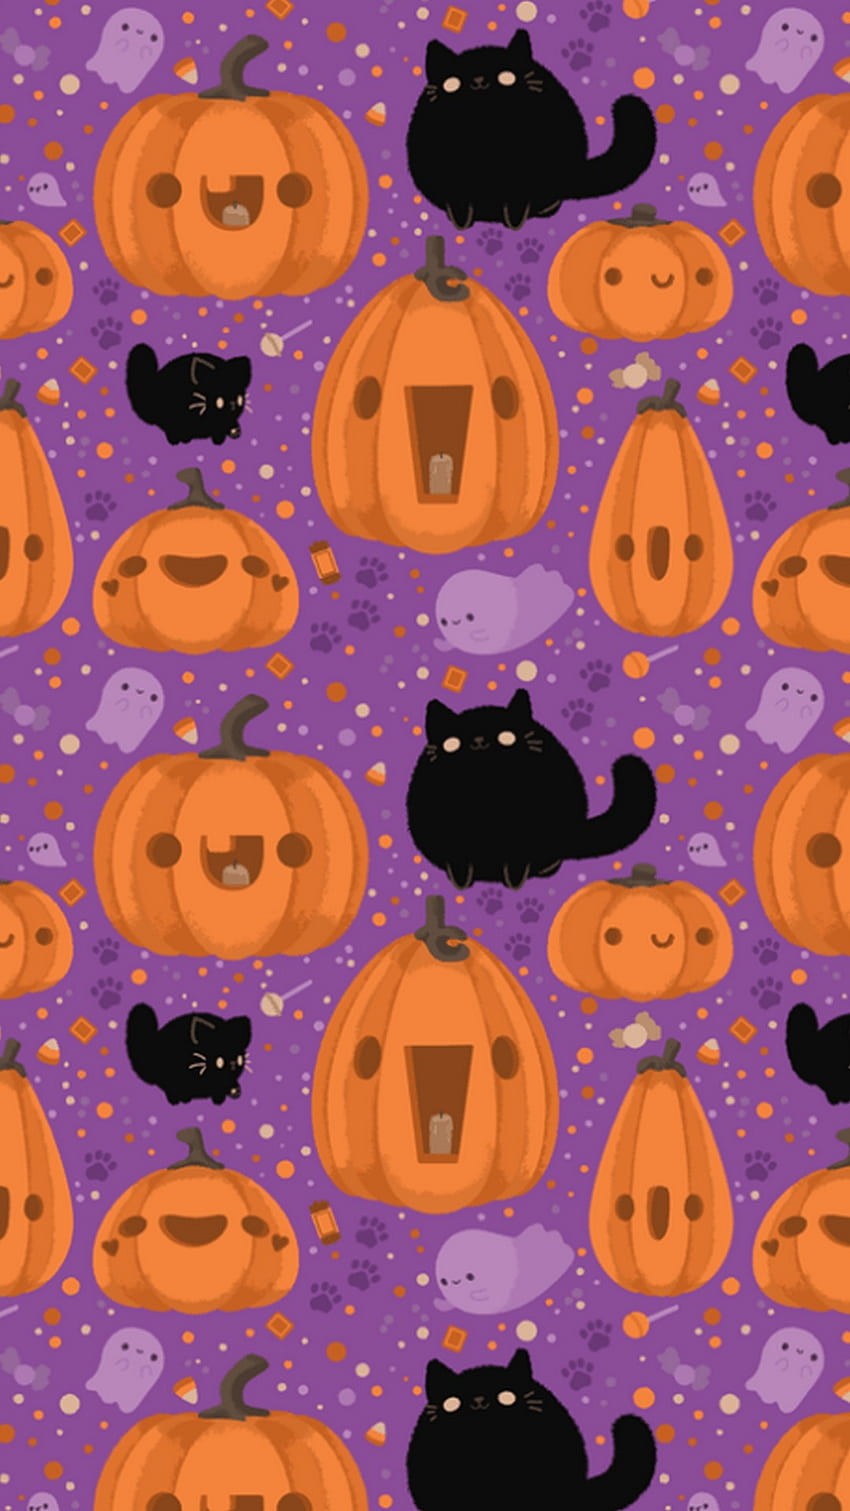 Halloween Aesthetic Background For Android - 2021 Android, Cute Aesthetic Halloween HD-Handy-Hintergrundbild